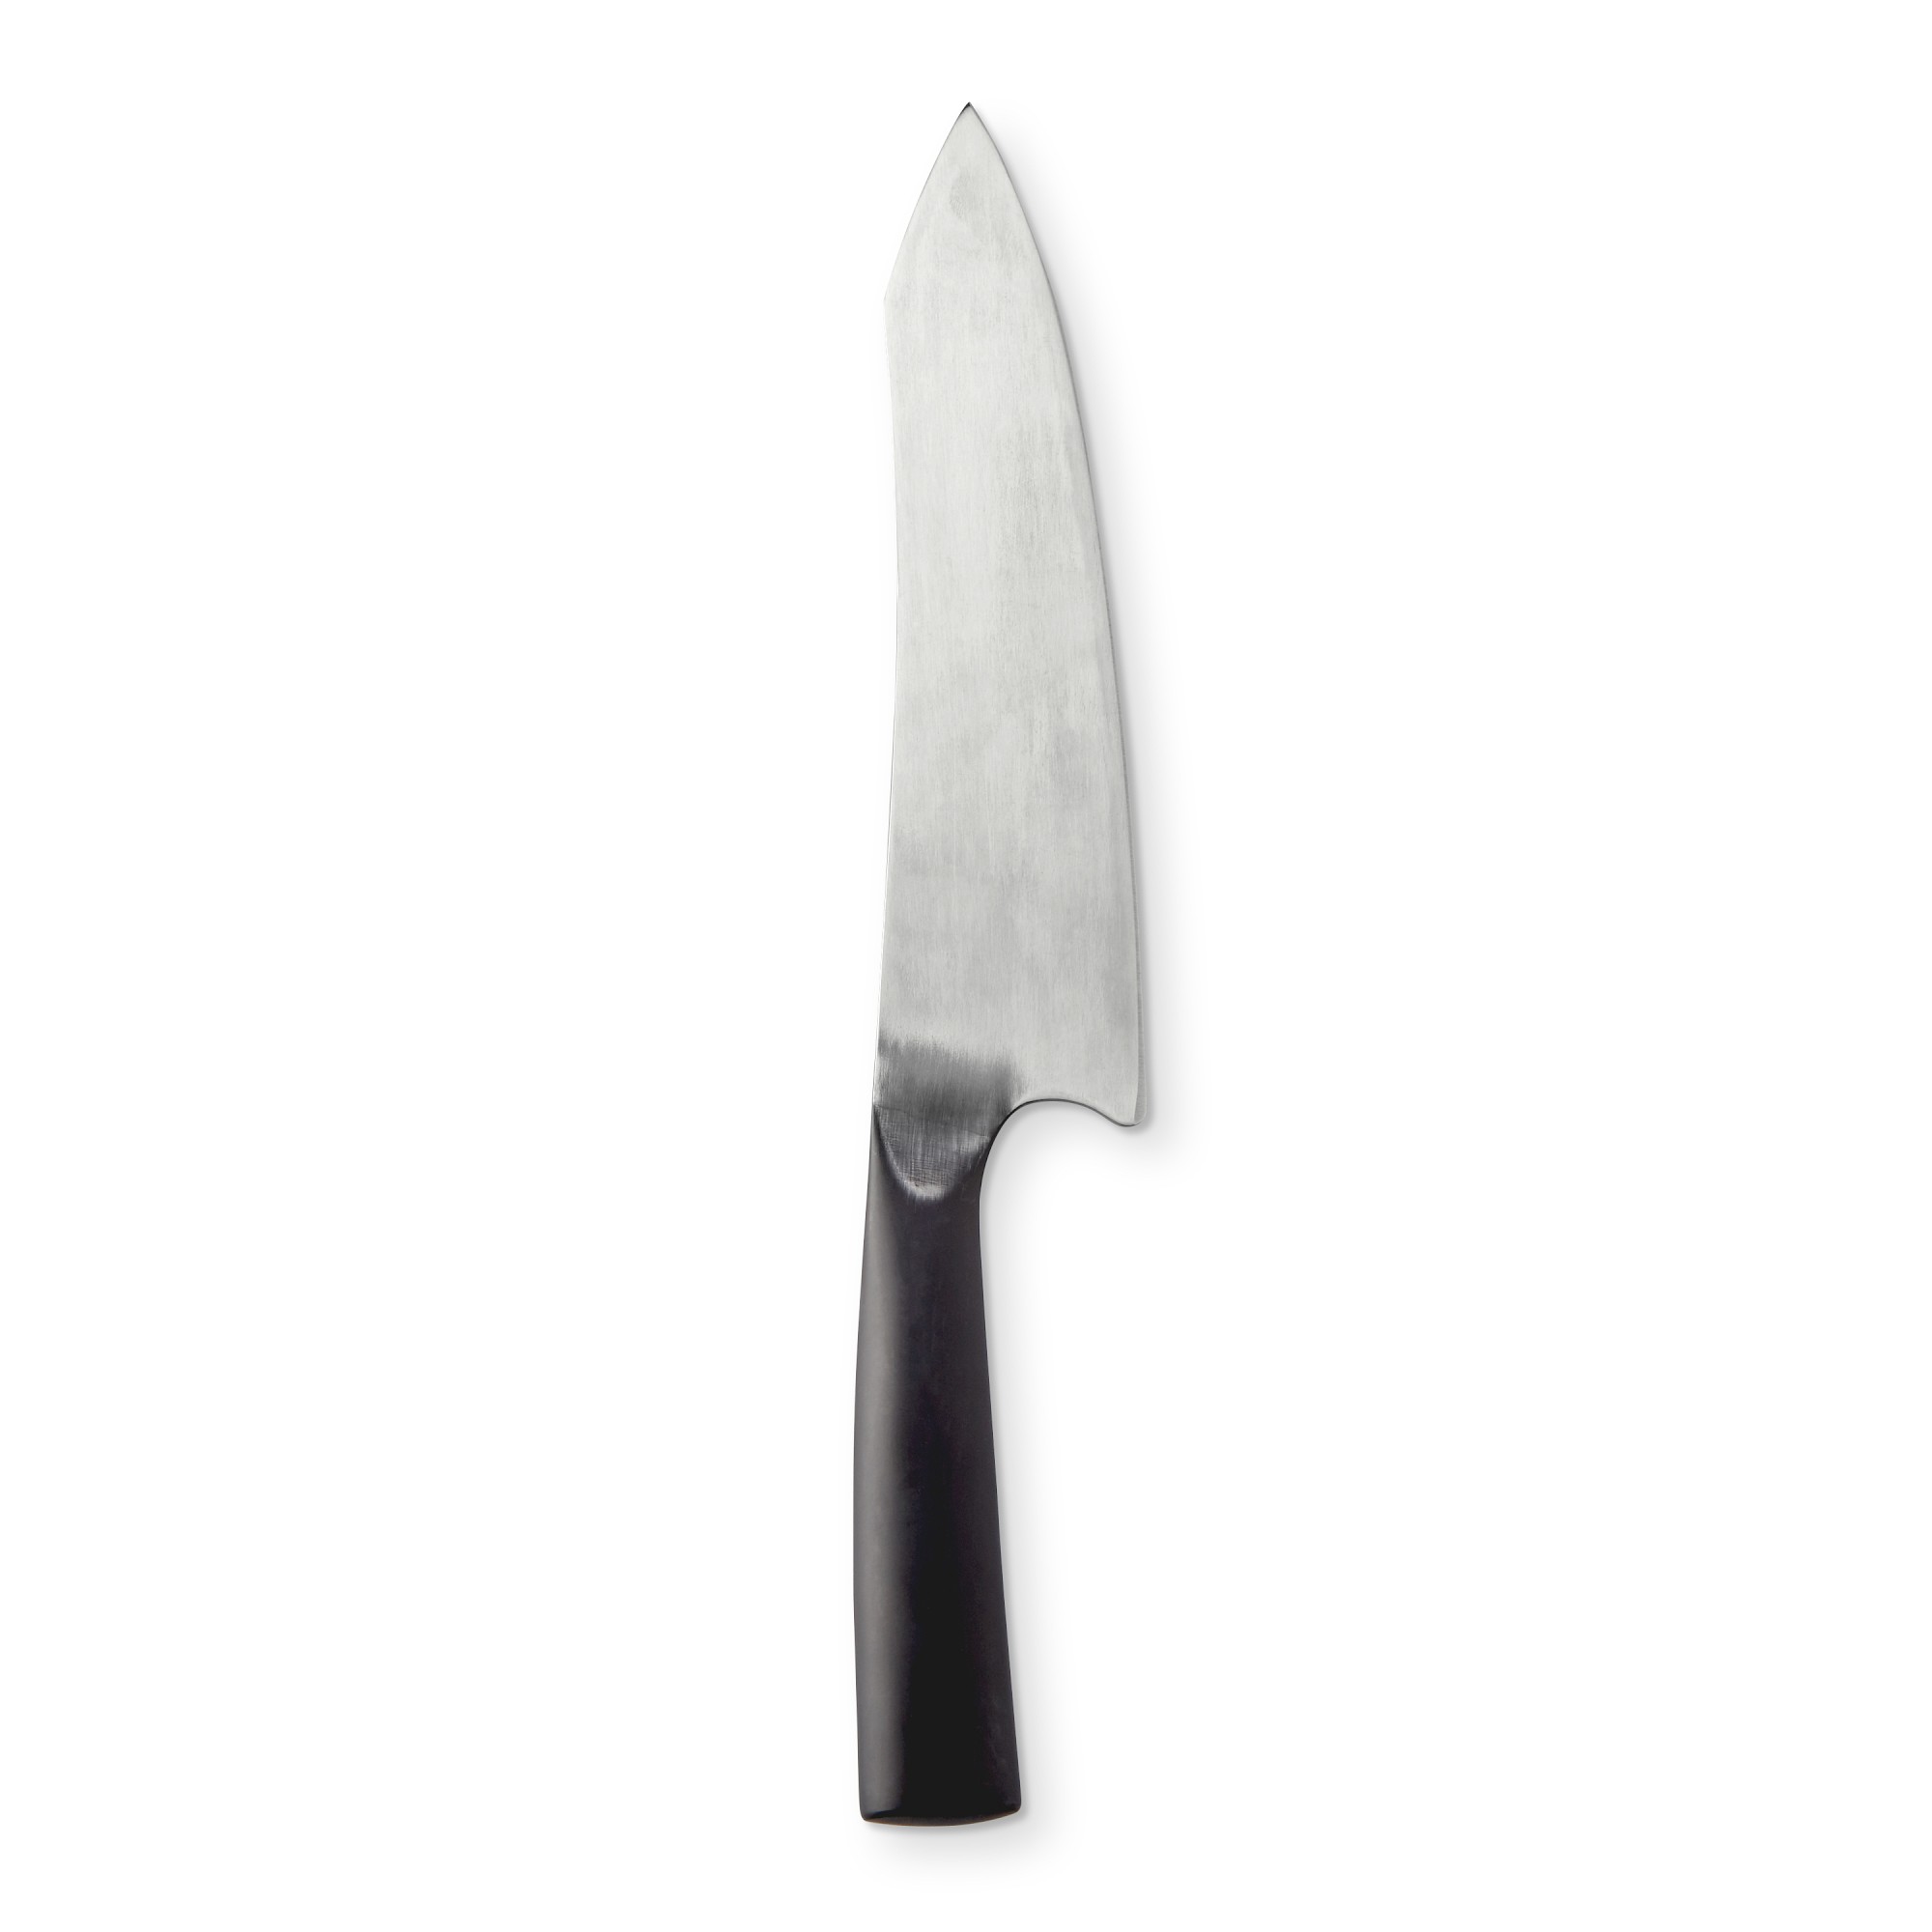 Schmidt Brothers Carbon-6 Chef's Knife, 8"